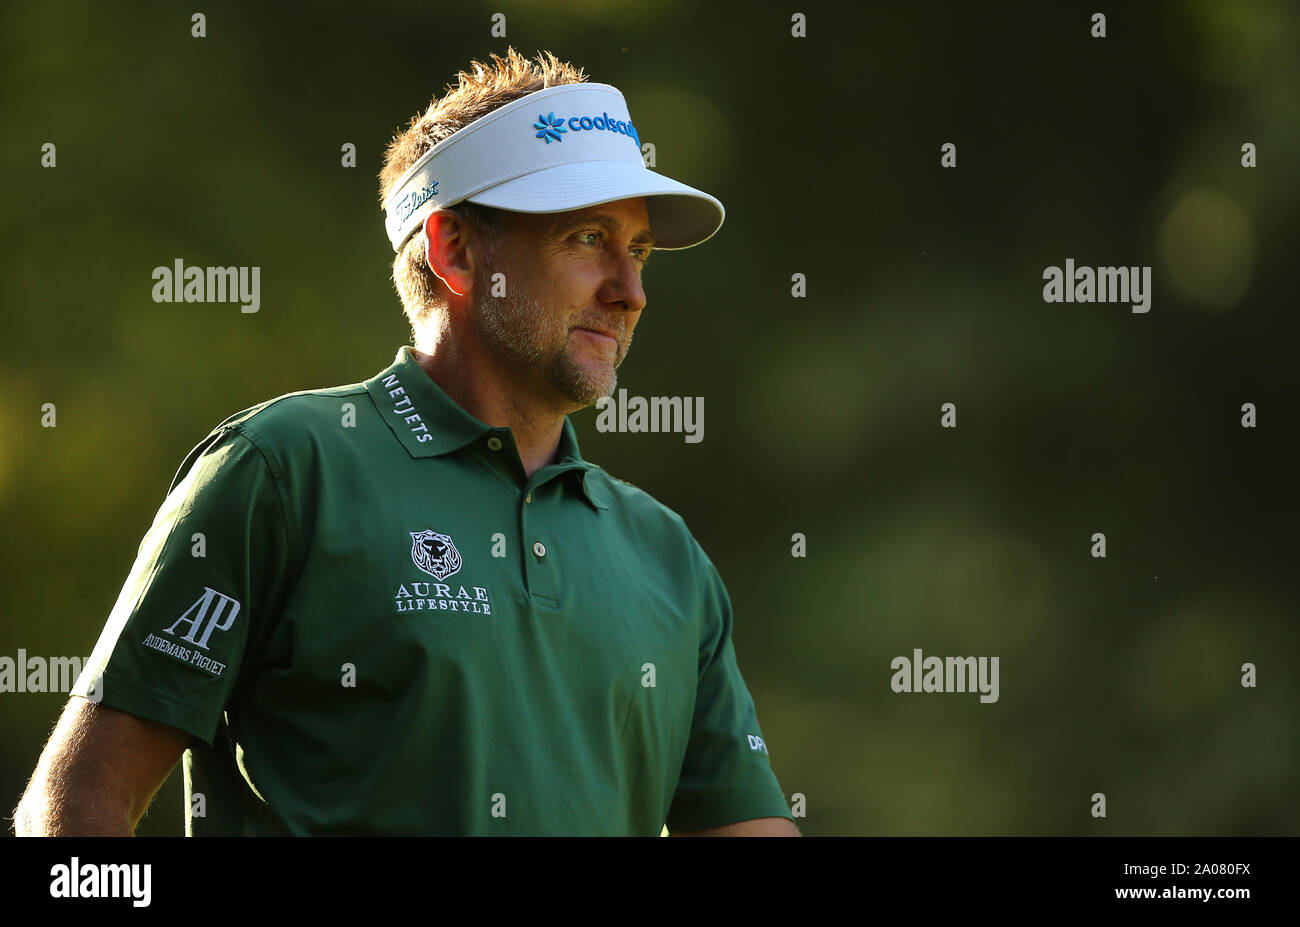 Wentworth Golf Club, Virginia Water, UK. 19 September 2019. Ian Poulter of England during Day 1 at the BMW PGA Championship. Editorial use only. Credit: Paul Terry/Alamy. Credit: Paul Terry Photo/Alamy Live News Stock Photo